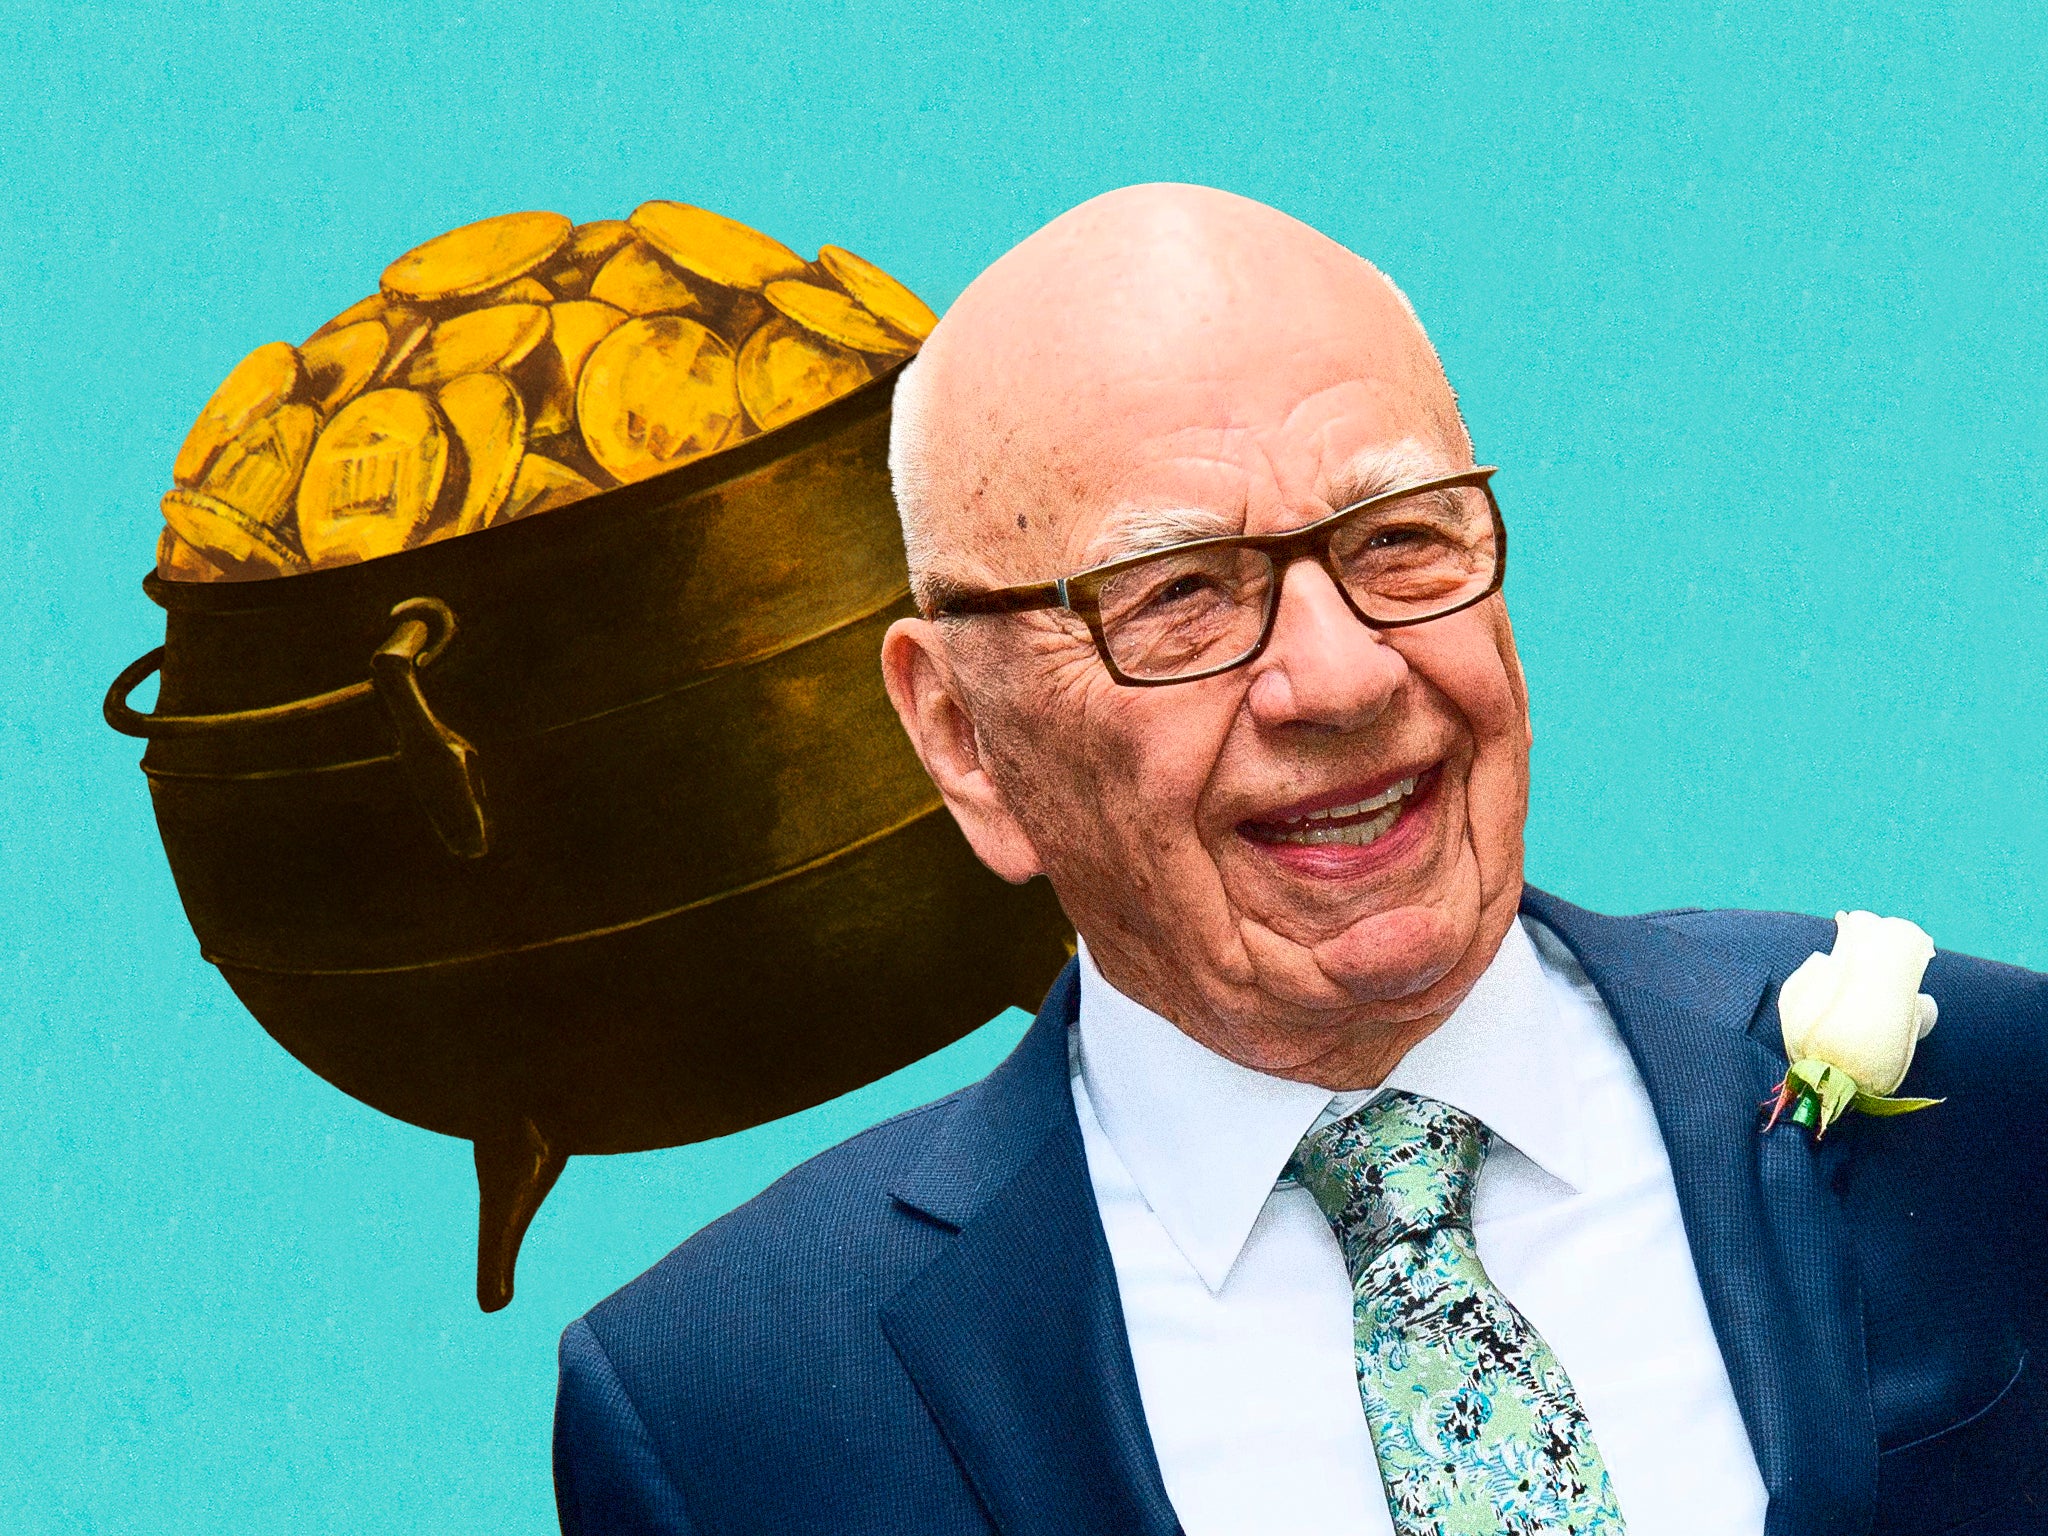 ‘You spend a lot less on lawyers if you’ve thrashed it all out before you even get going’: Rupert Murdoch and his (illustrative) pot of gold